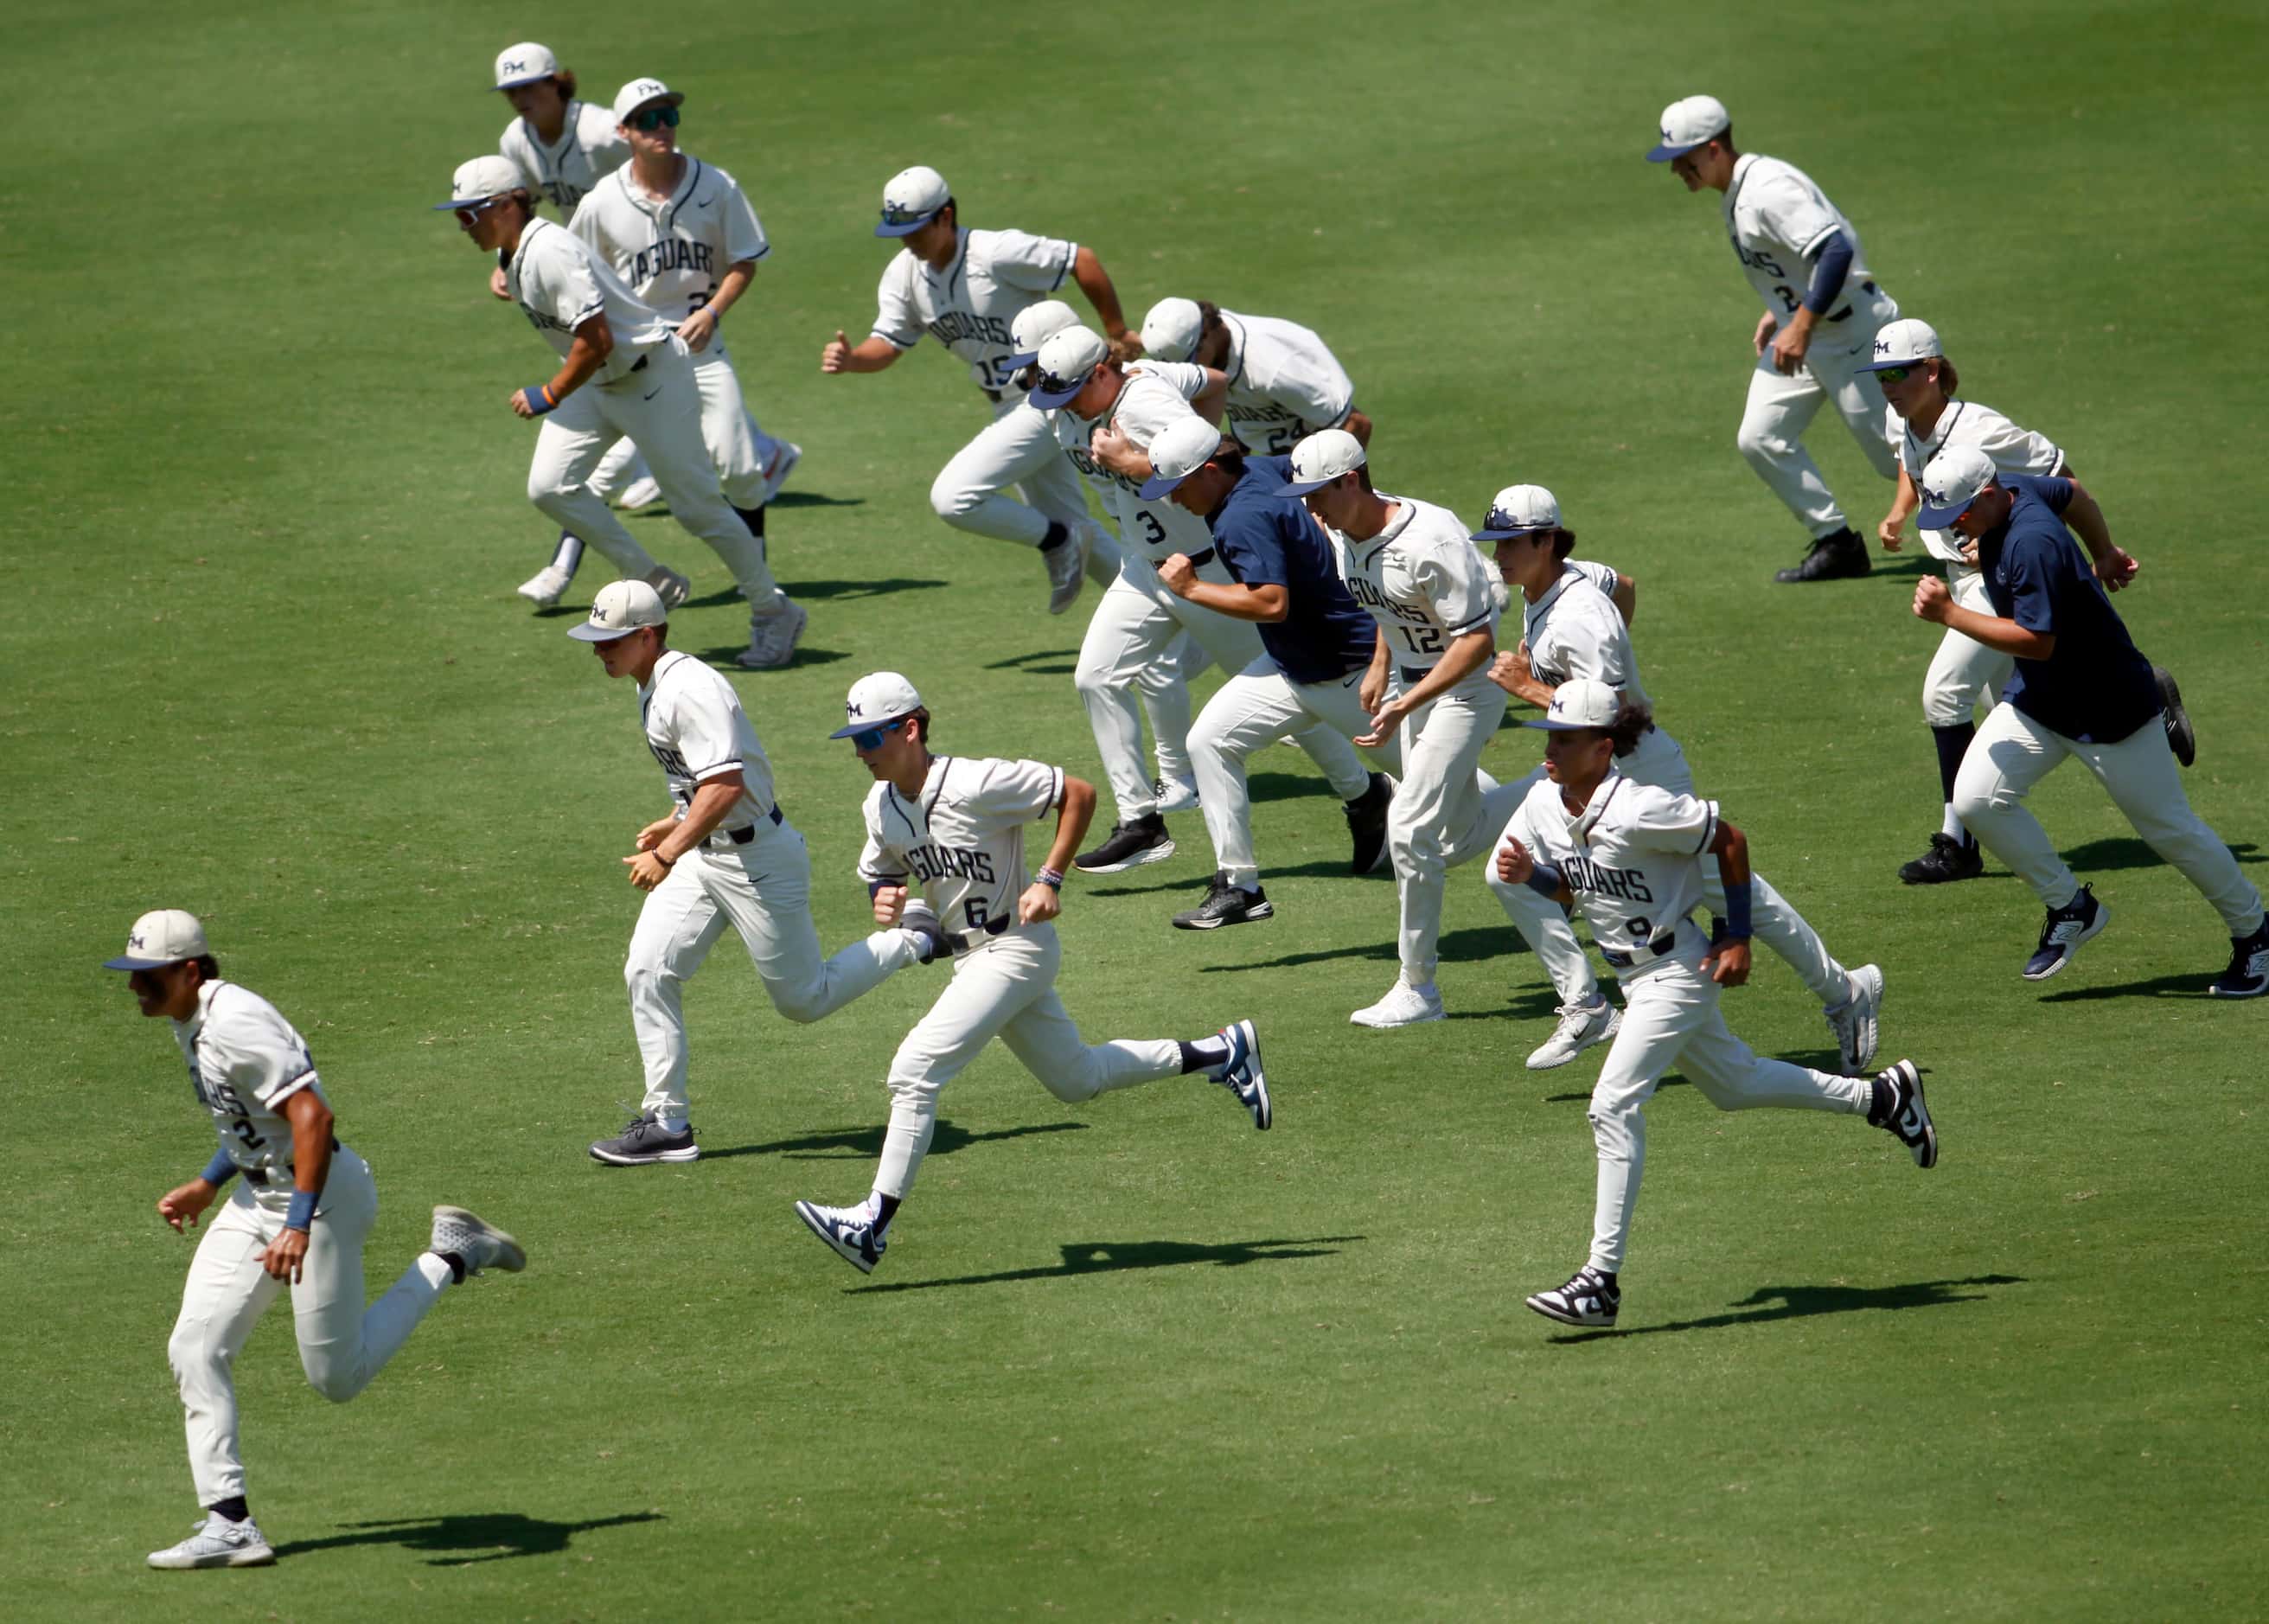 Flower Mound players and coaches run as part of their warm-up routine prior to the start of...